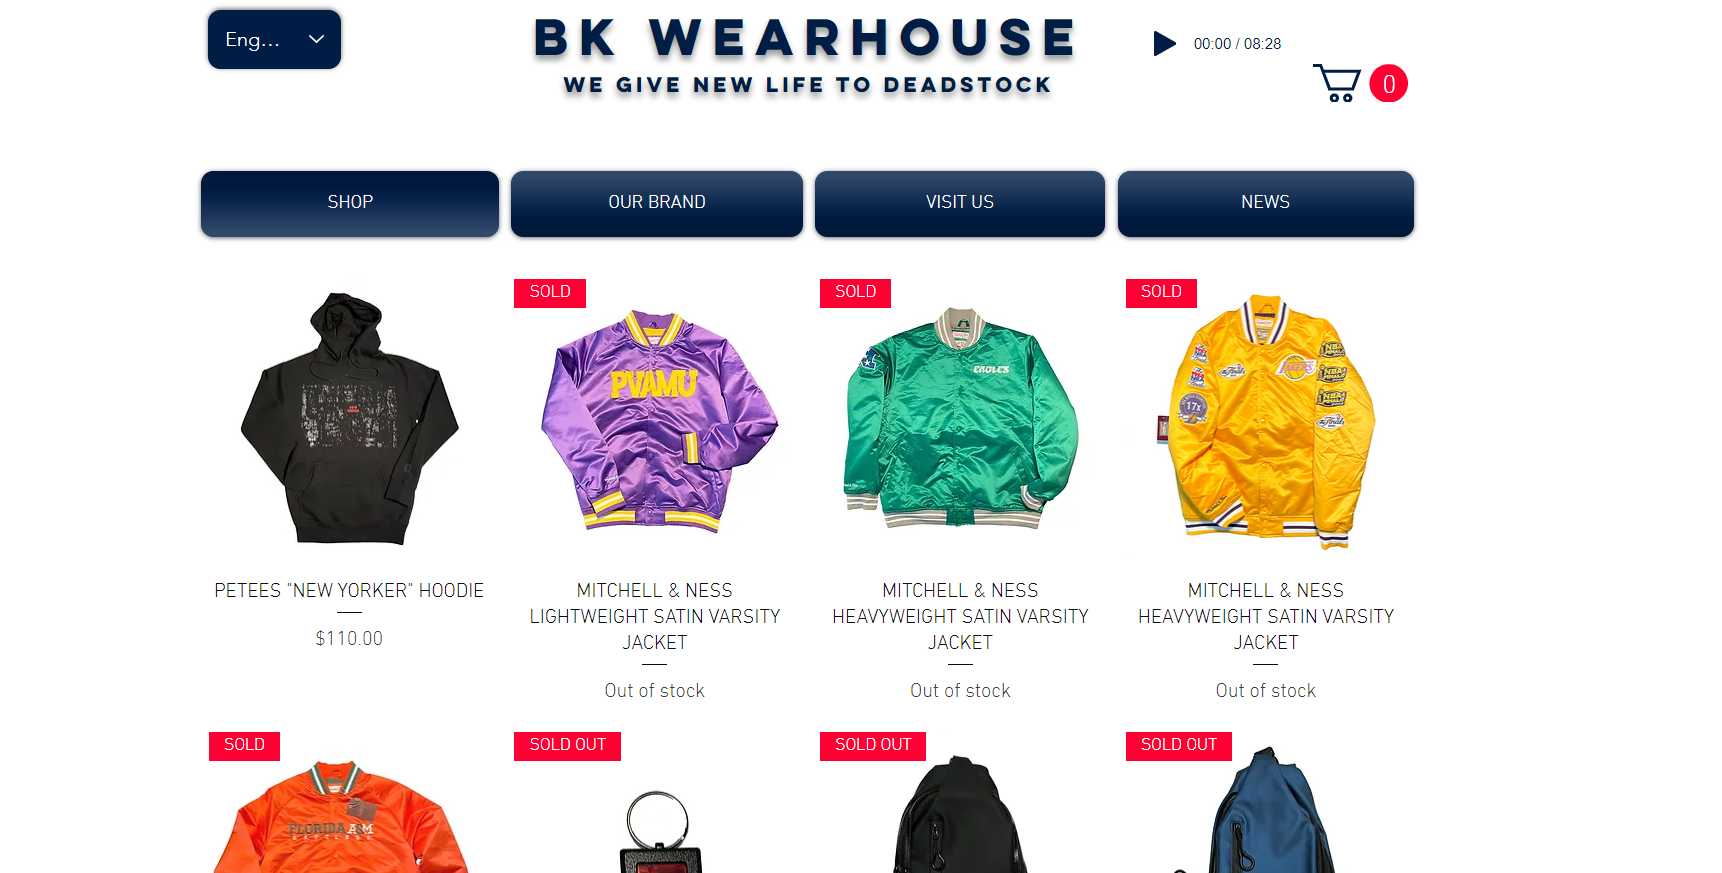 Located in Williamsburg - South Side, BK Wearhouse offers a wide range of shoes, men's clothing, and women's clothing. 